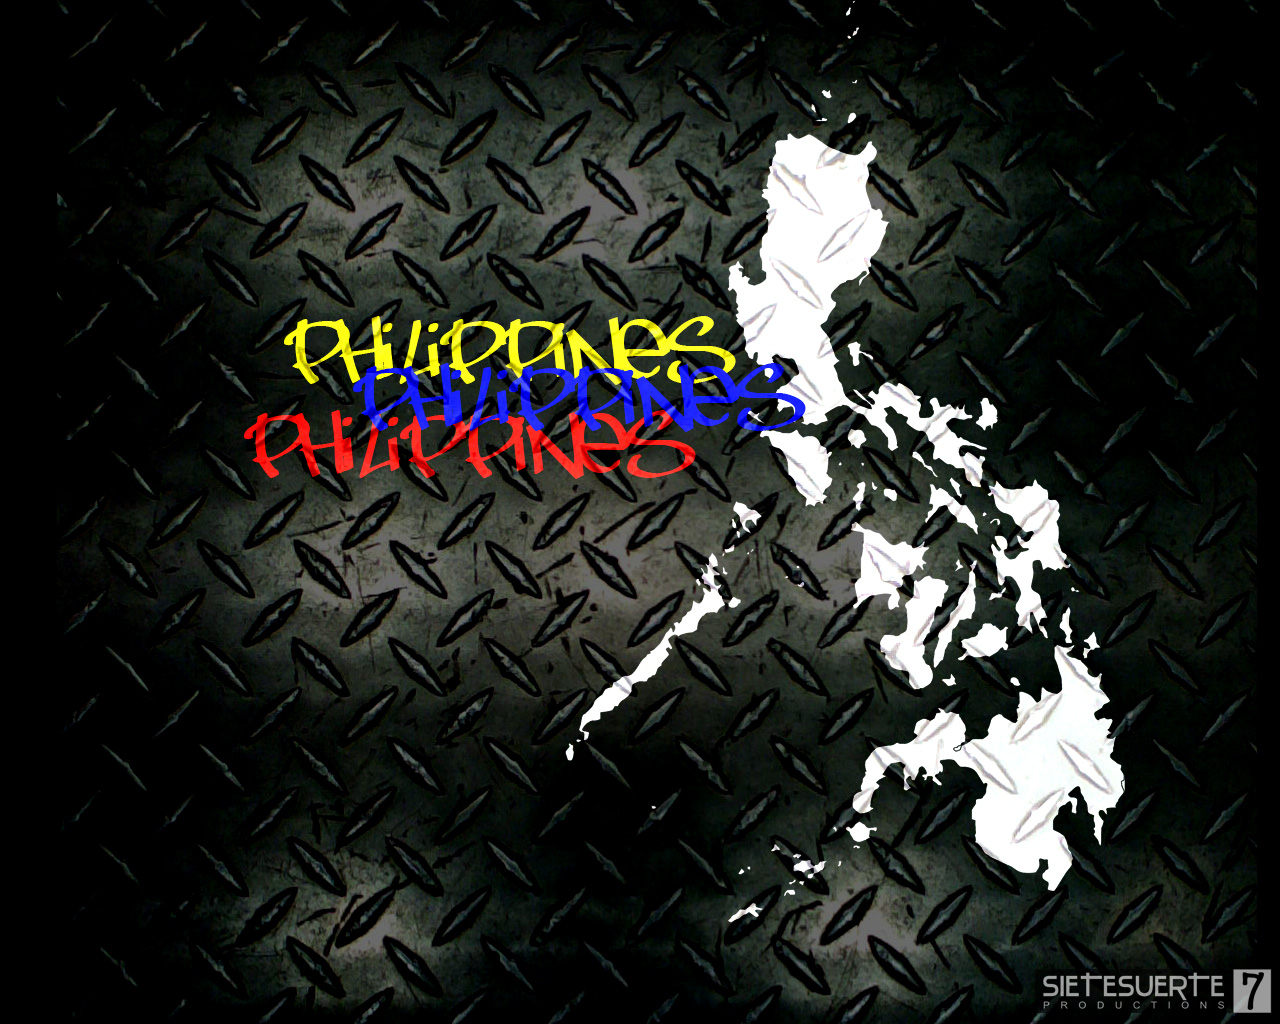  Philippine Boxing Forum View topic   A wallpaper for a Filipino 1280x1024